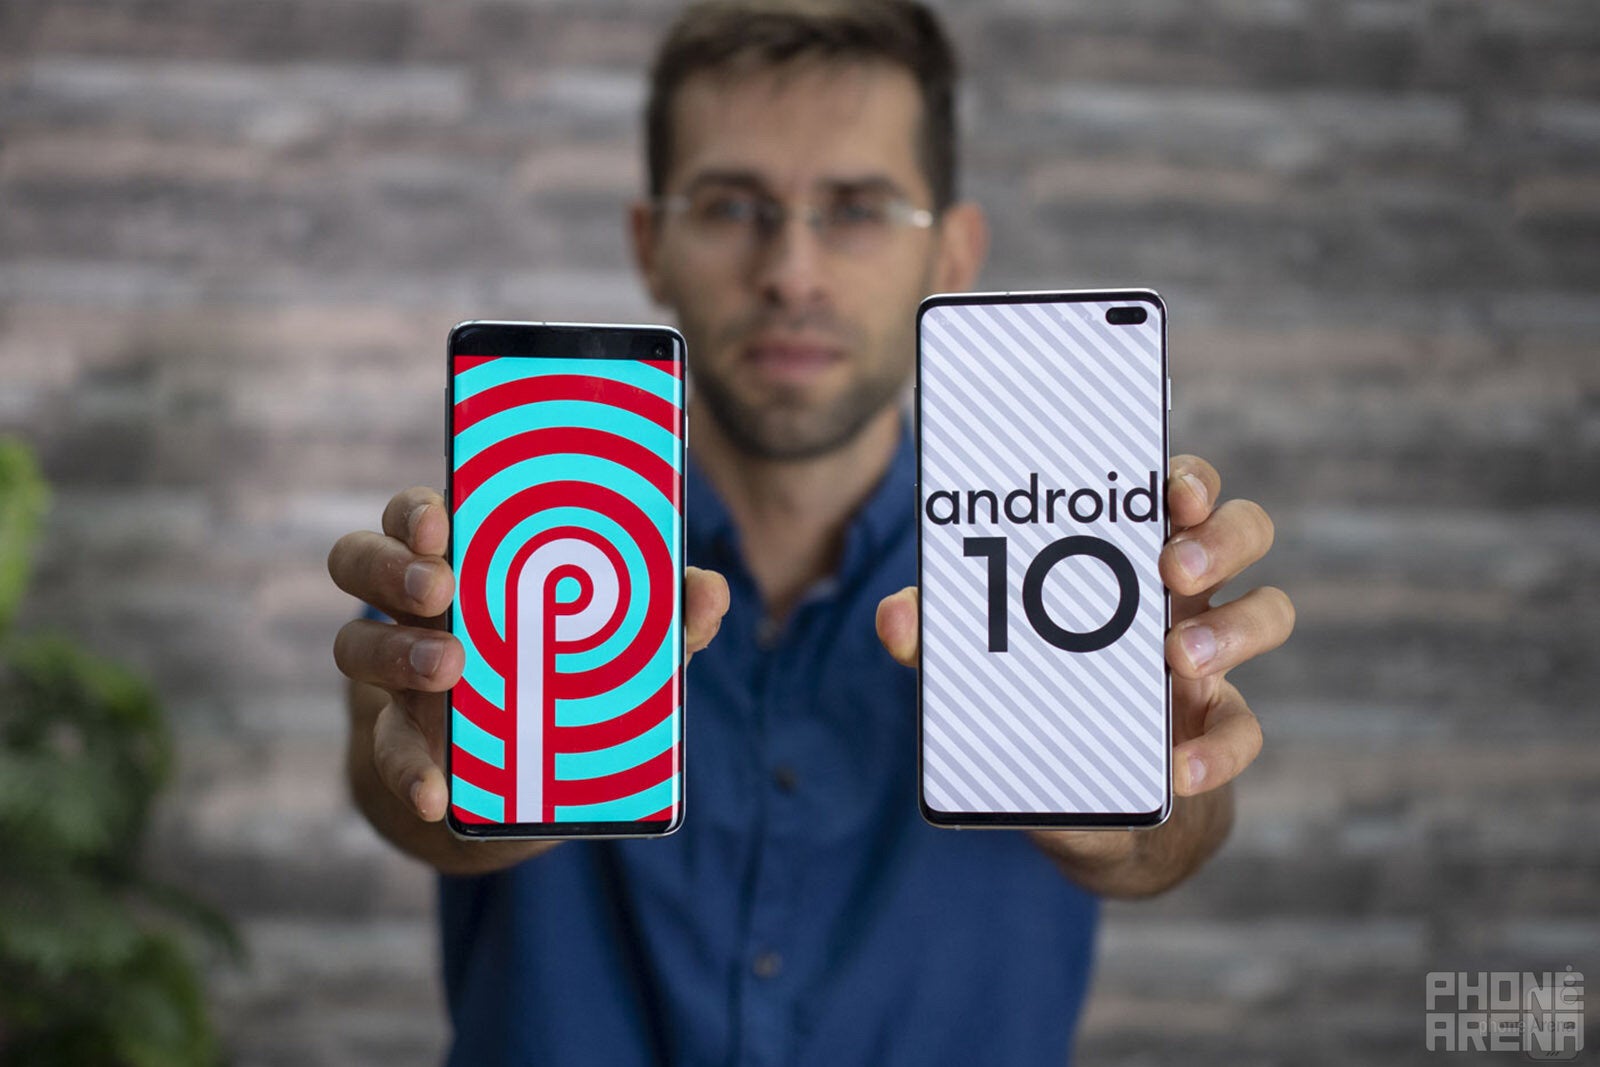 Android 10 with One UI 2.0 on the Samsung Galaxy S10+: Hands-on with all the new features